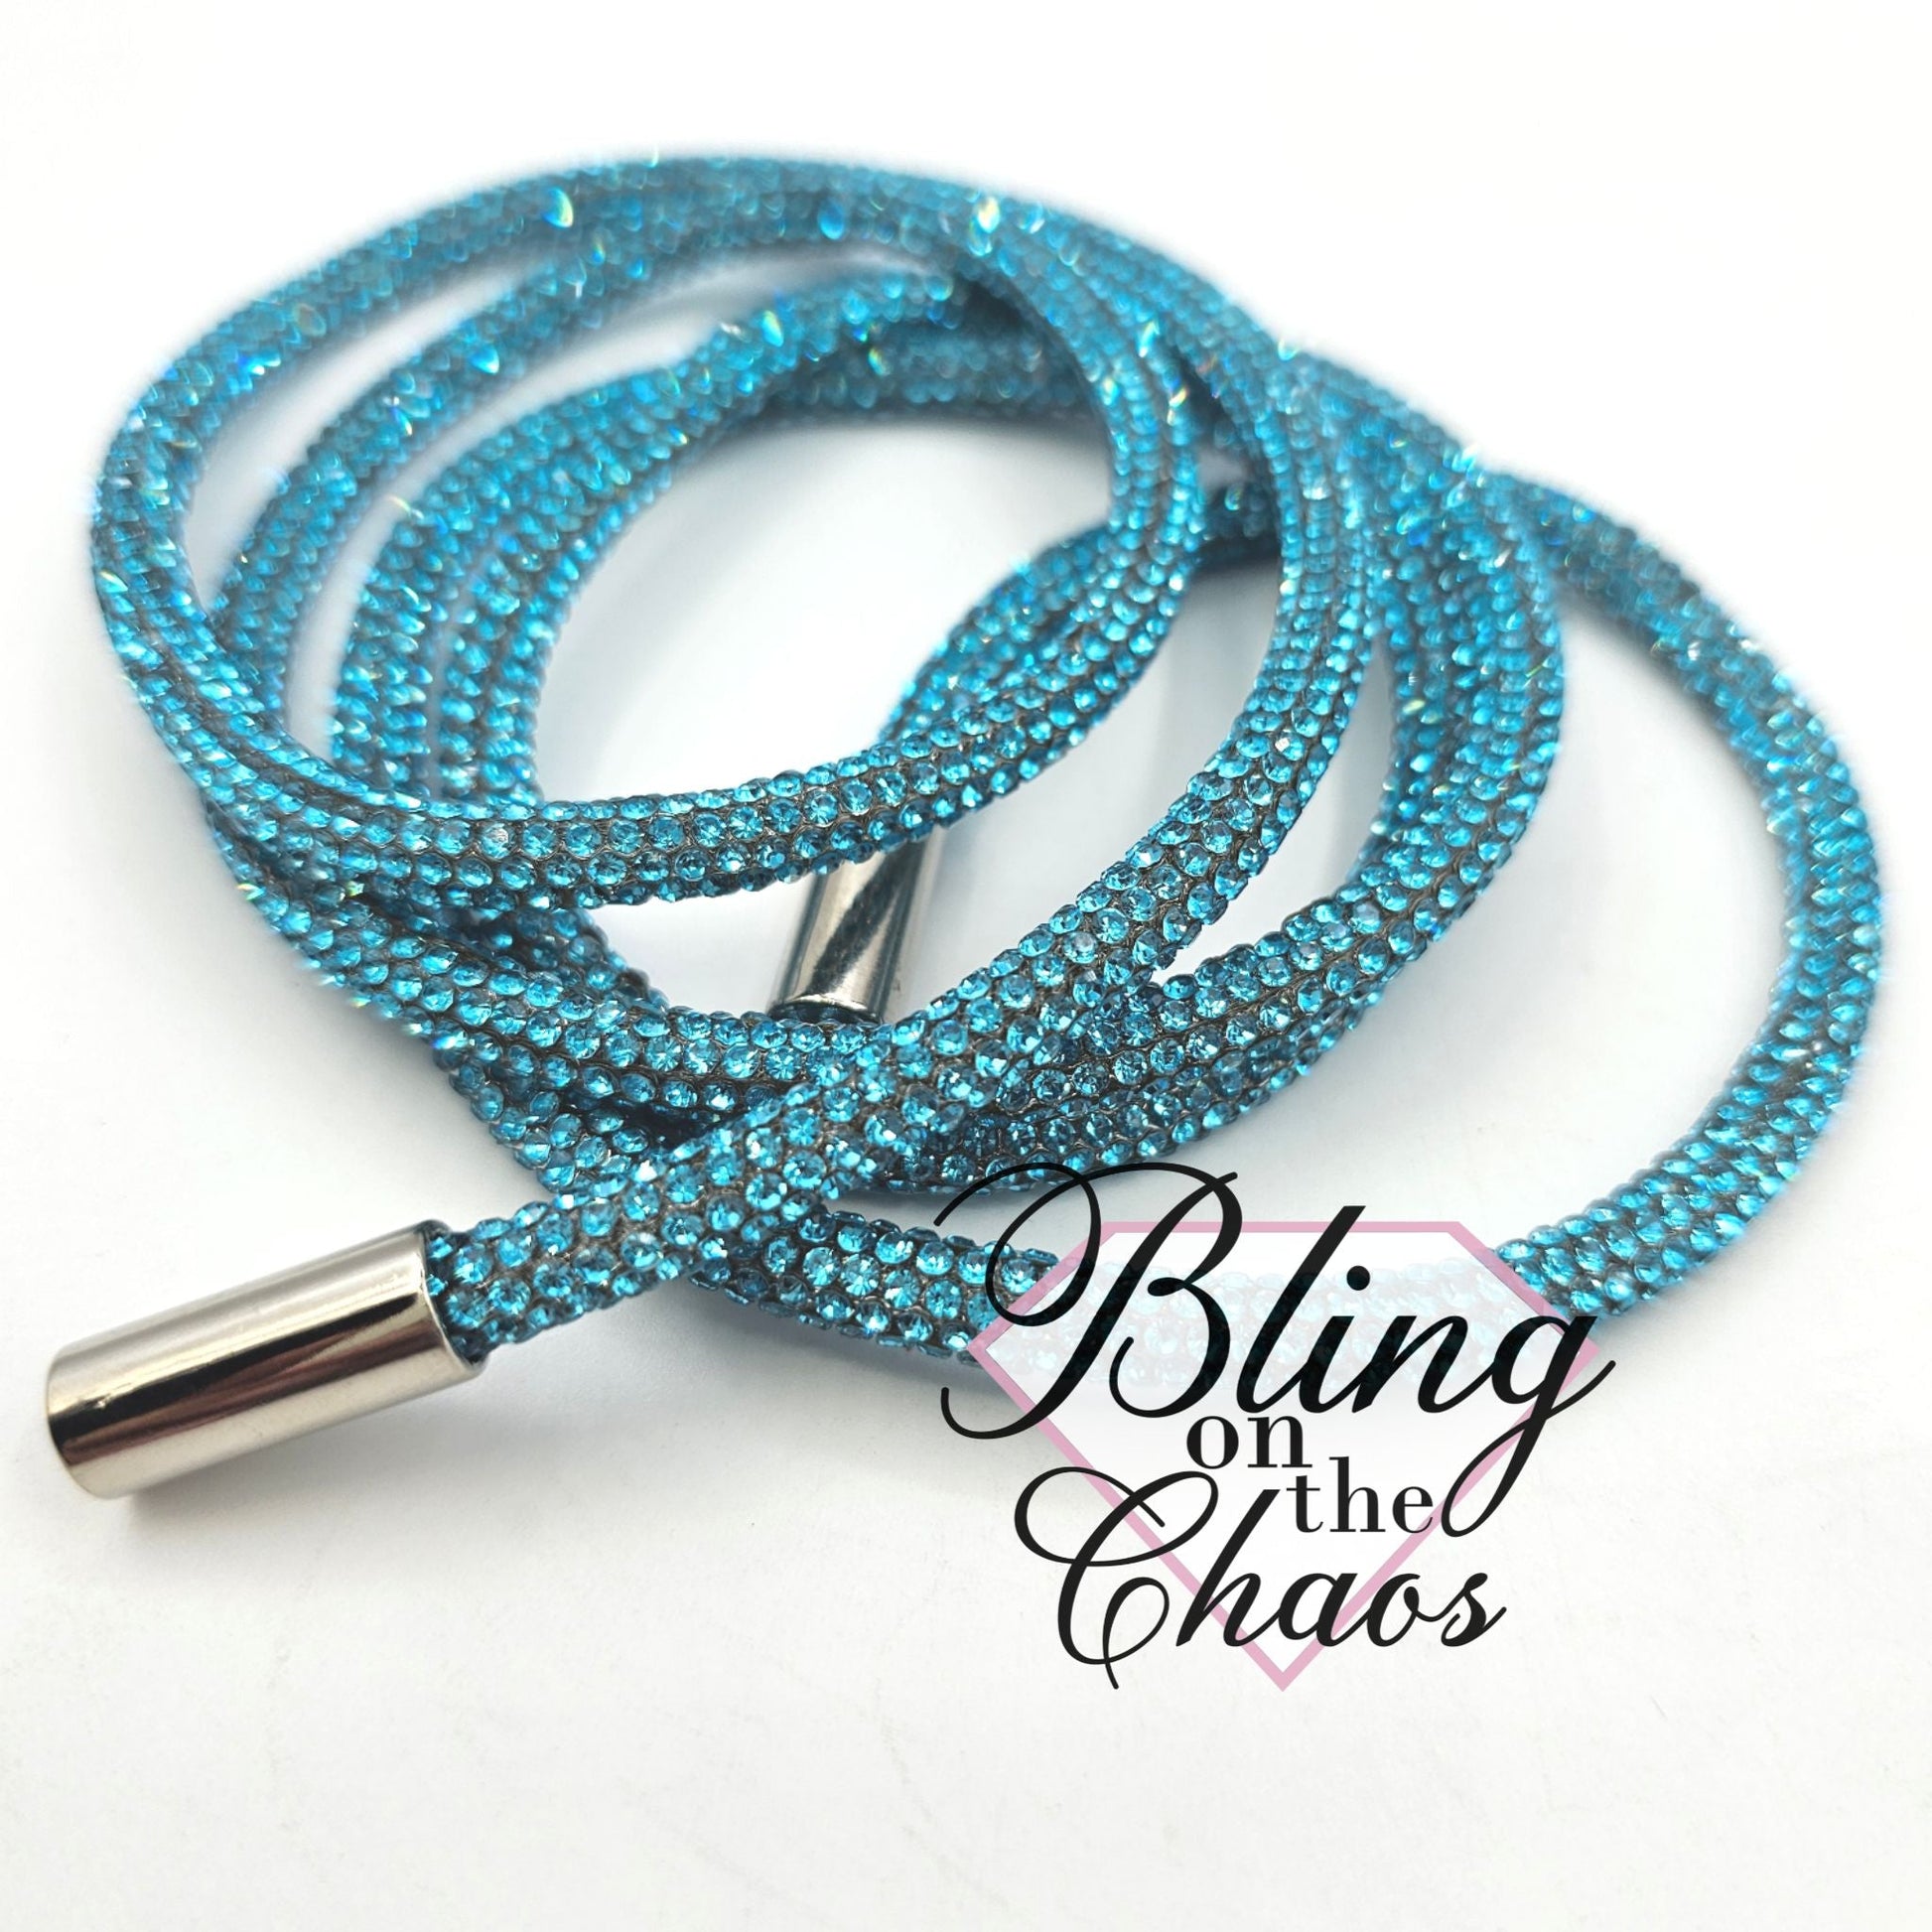 Rhinestone Cords-Bling on the Chaos